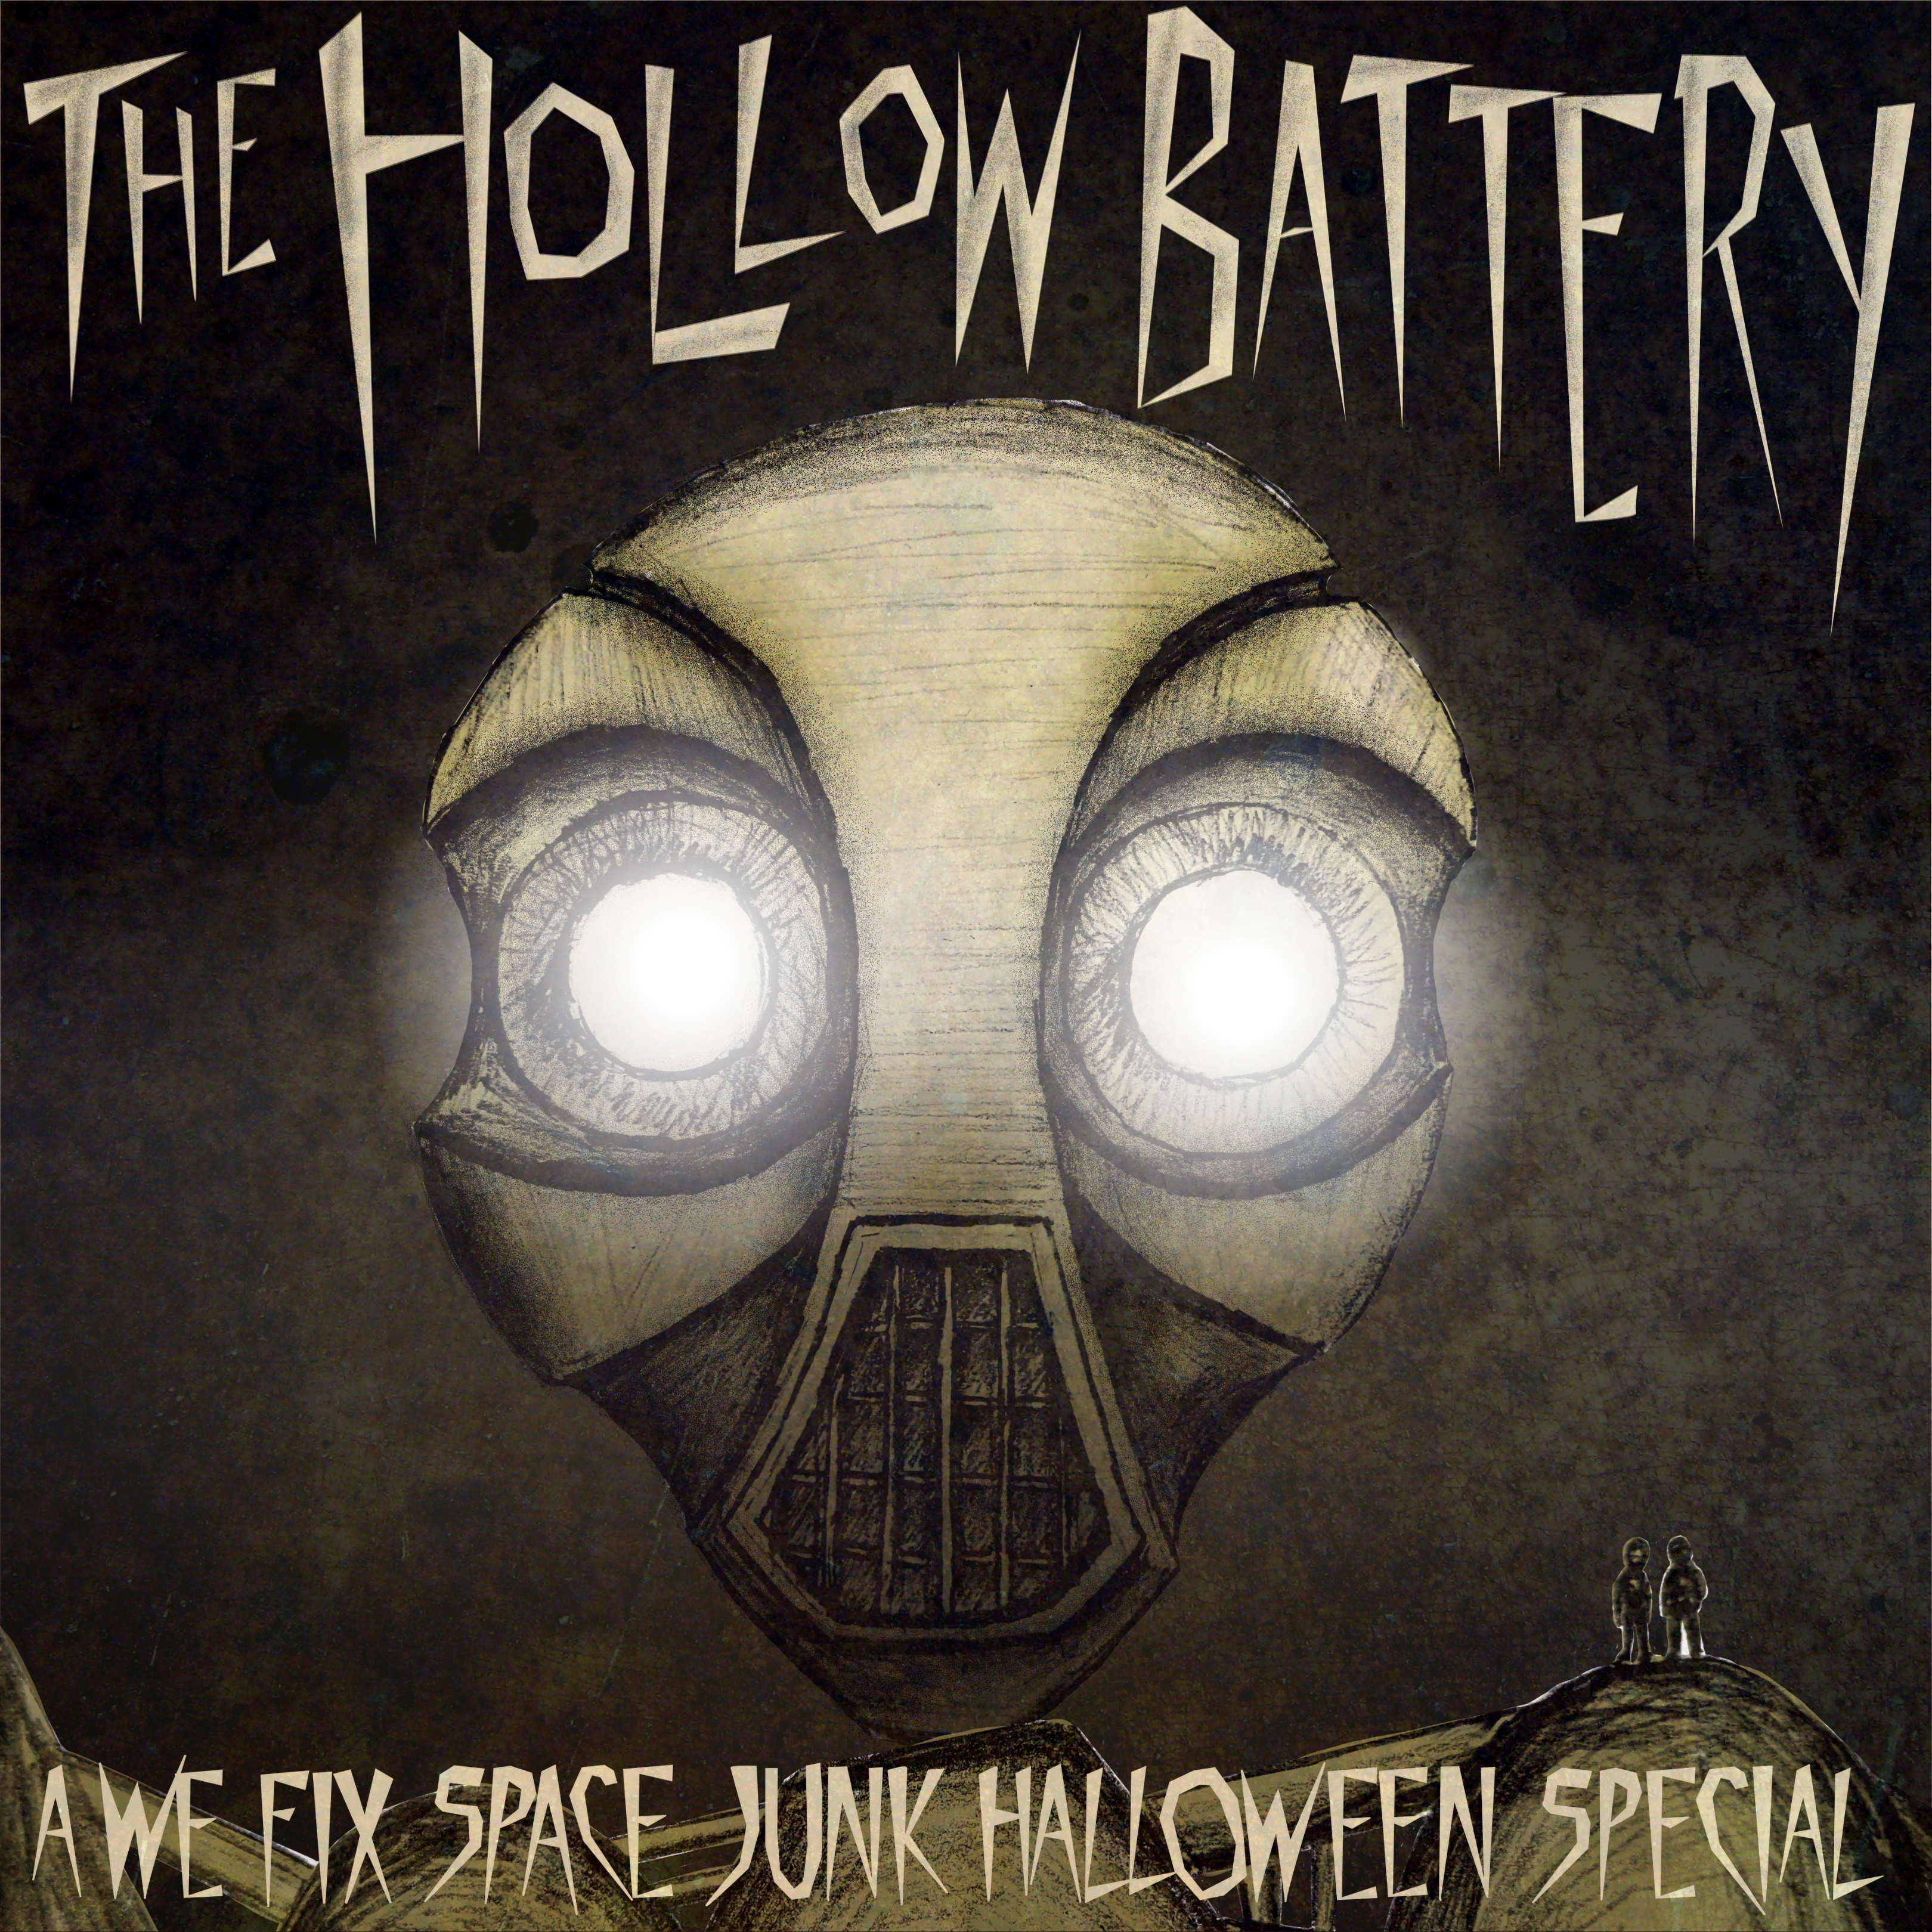 The Hollow Battery: A We Fix Space Junk Halloween Special! podcast episode